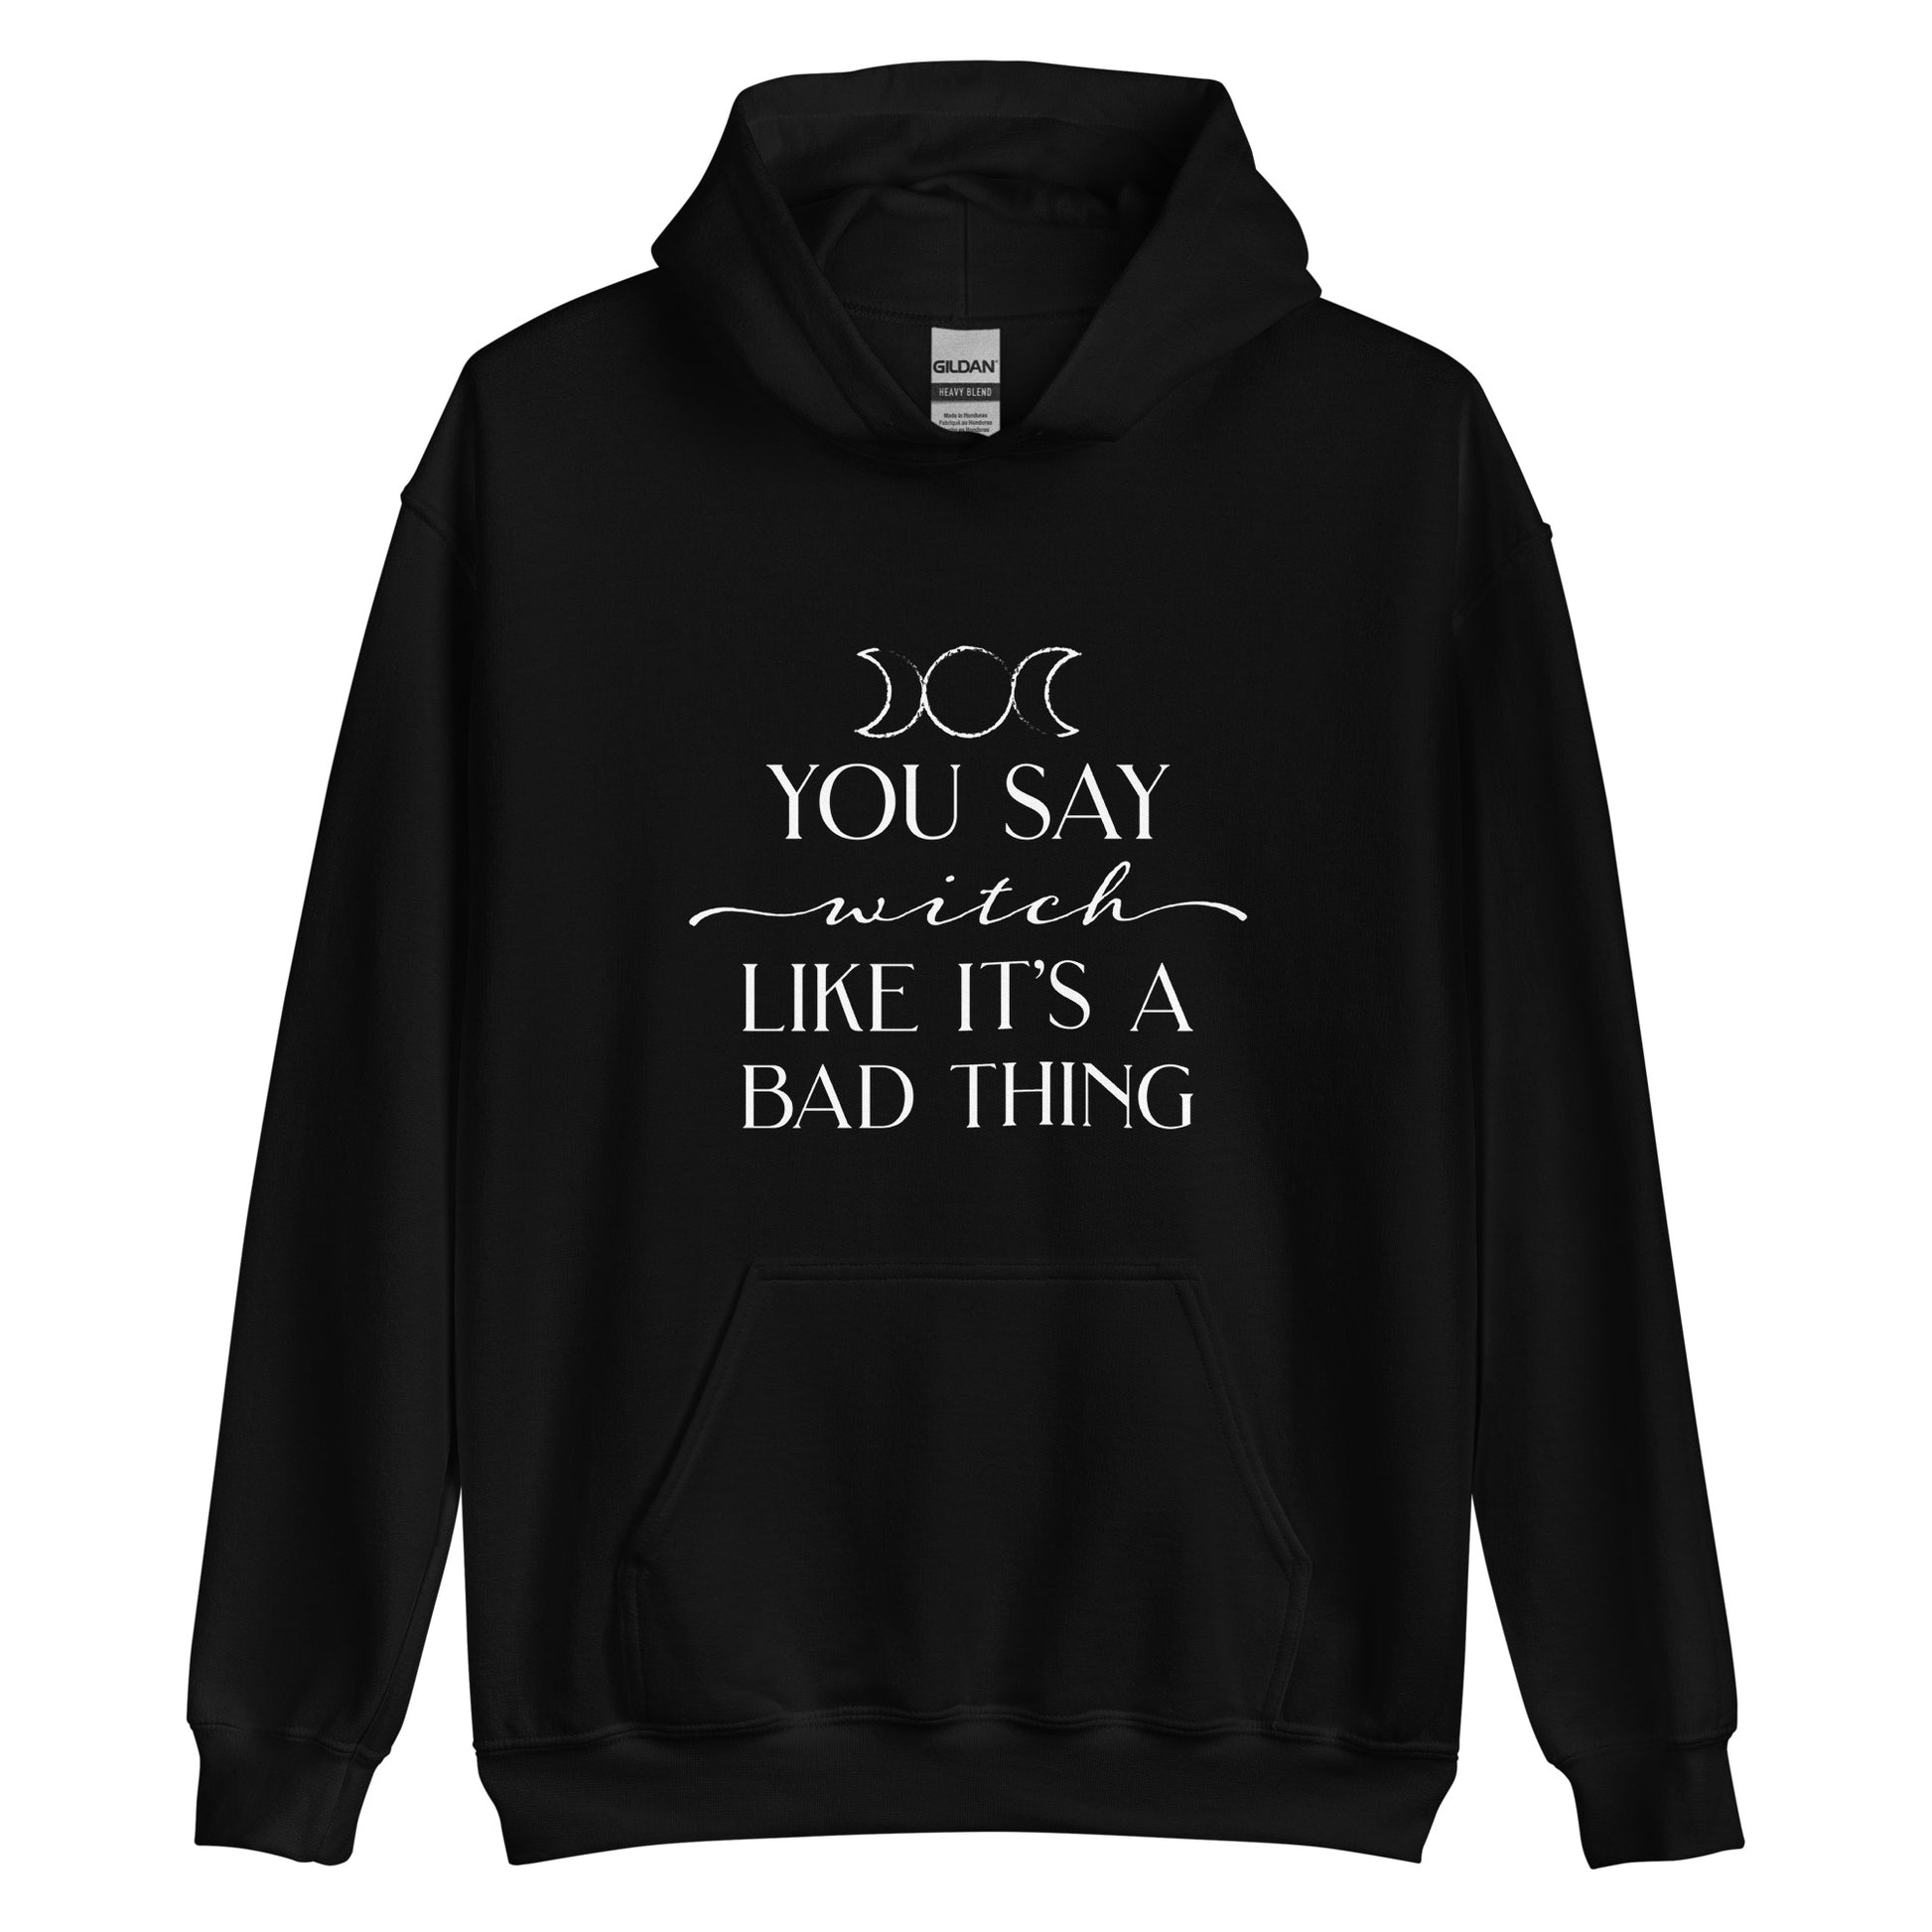 A black hooded sweatshirt featuring the triple goddess symbol and text reading "You say witch like it's a bad thing"